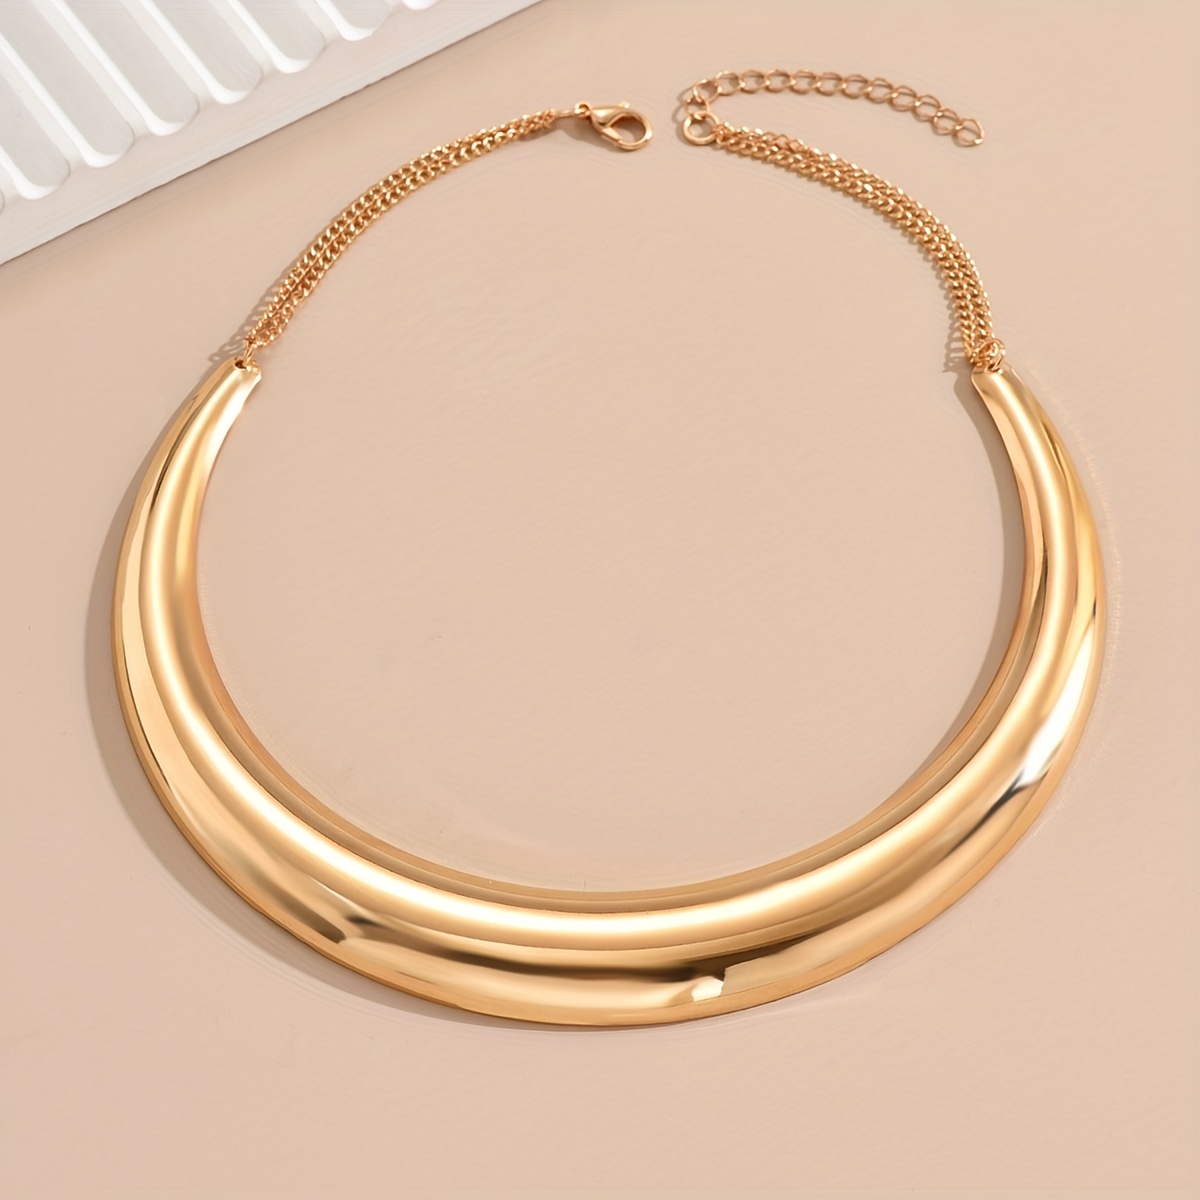 golden chain exaggerated chunky choker necklace for women girls party favors